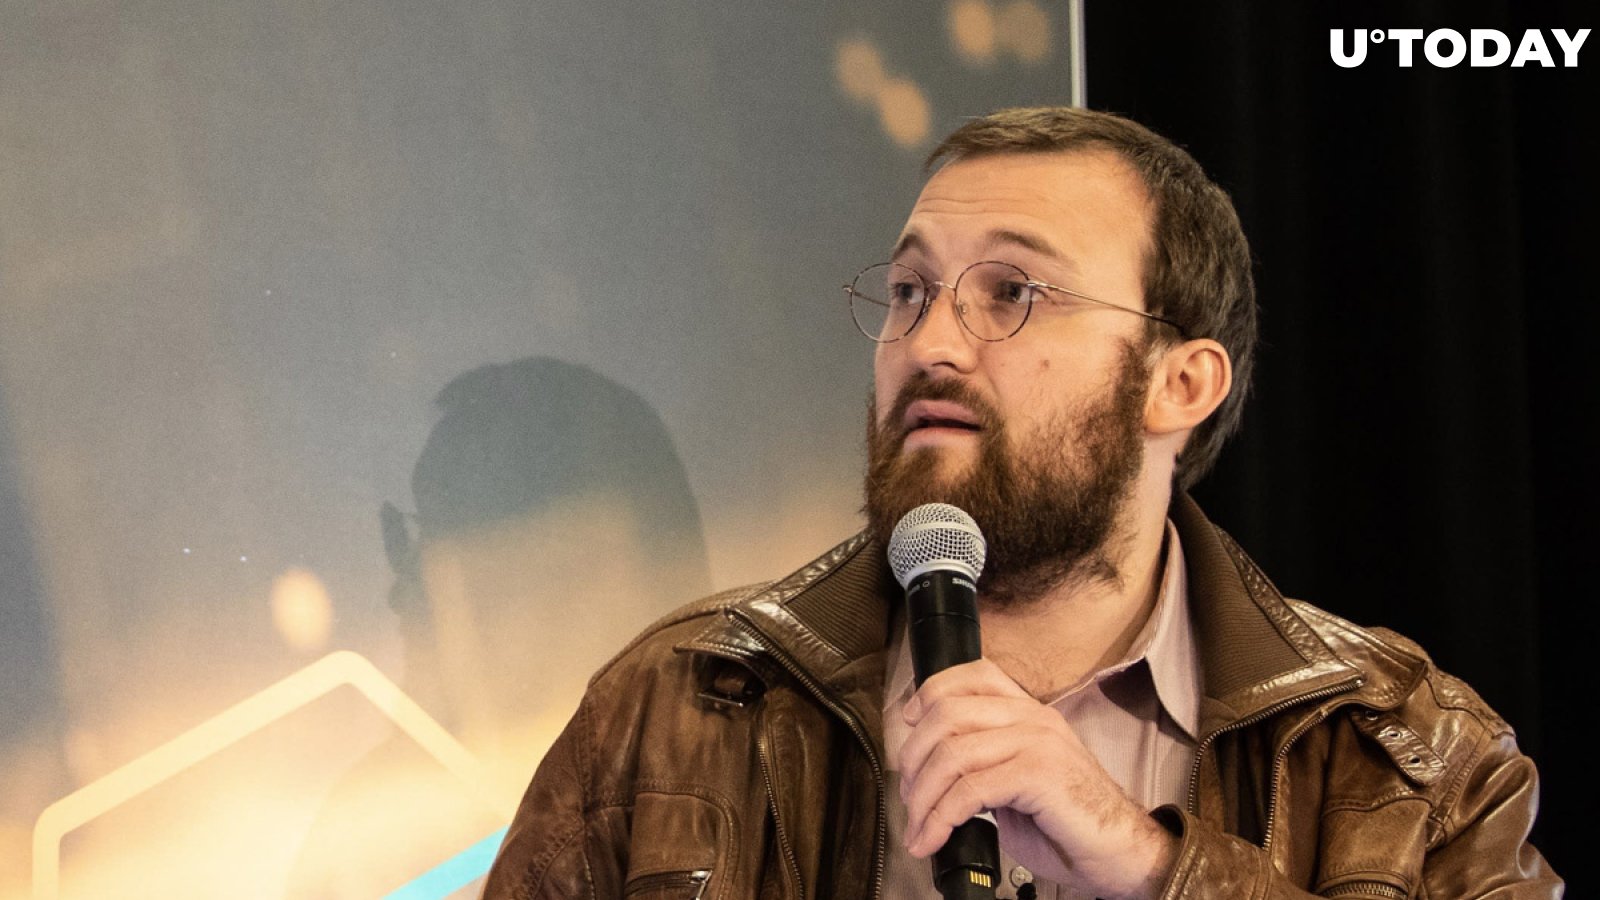 Cardano's Charles Hoskinson Calls New Node Software "Pretty Significant." Here's Why